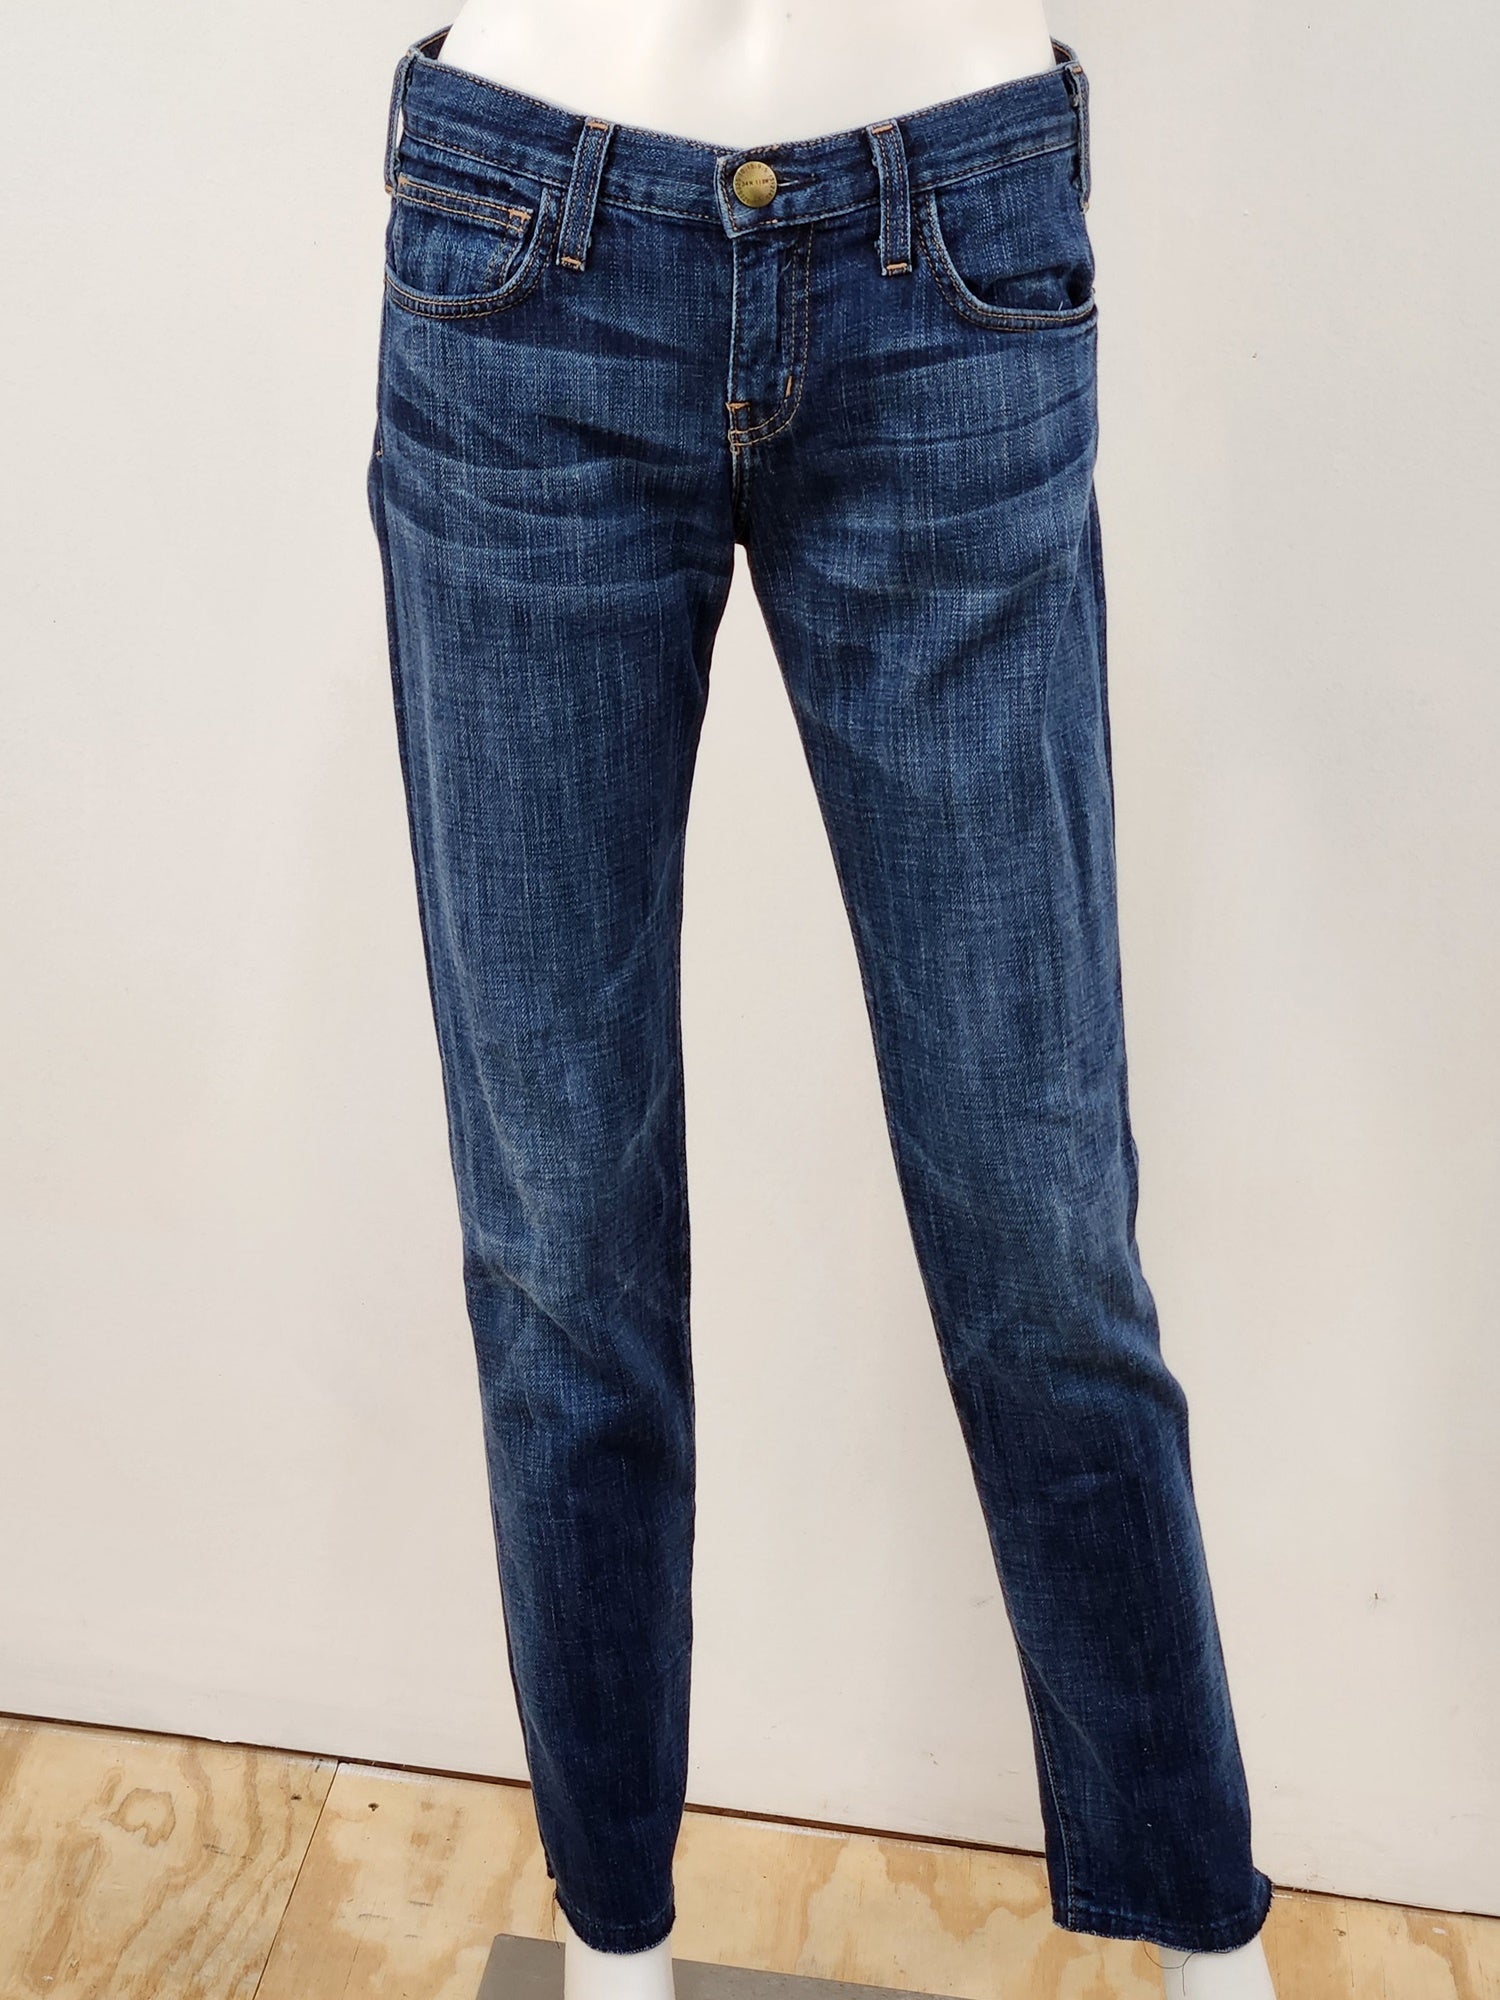 Roller Relaxed Skinny Jeans Size 25